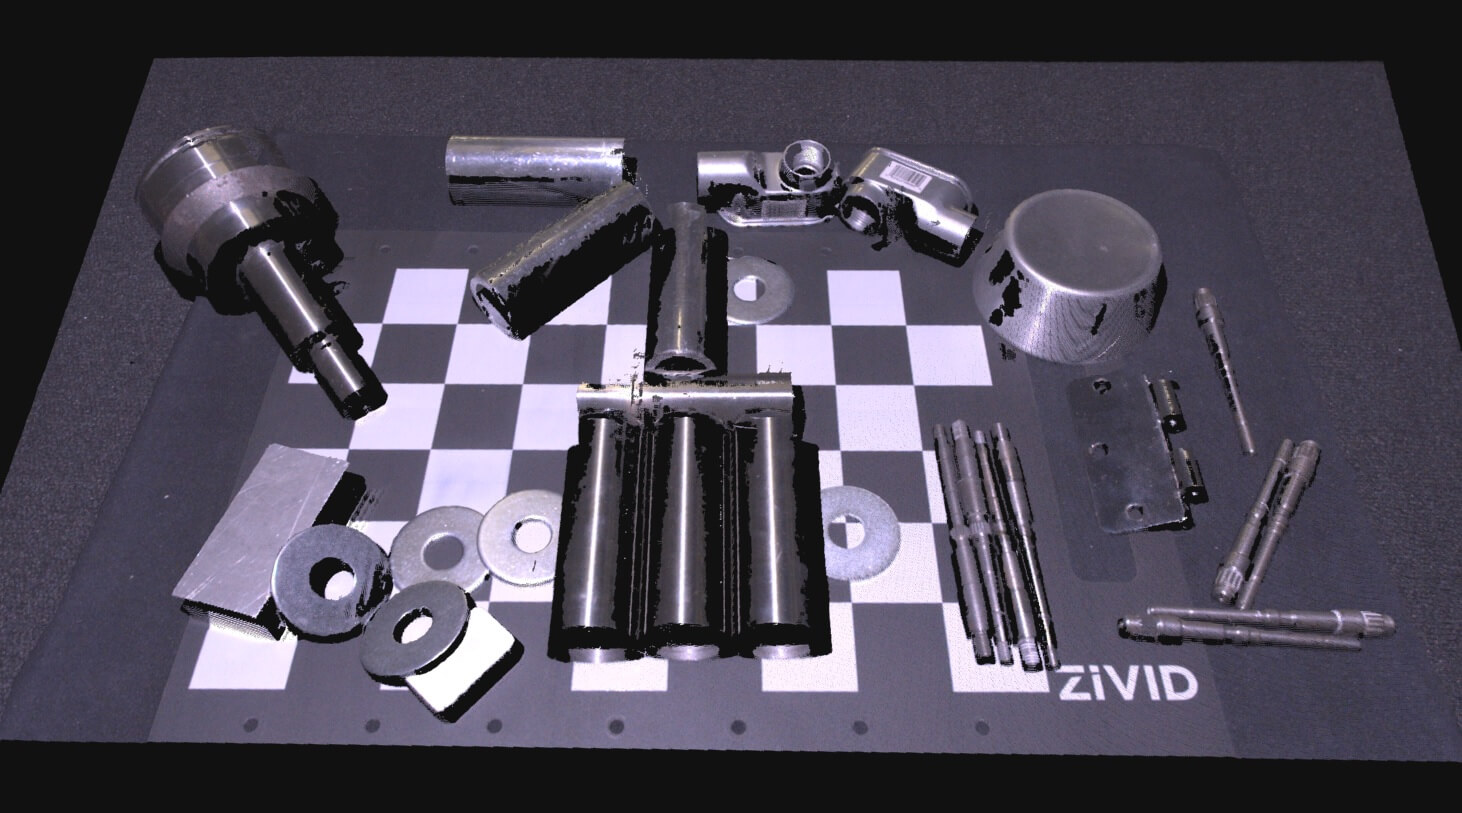 Zivid 3D camera captures high quality point clouds of reflective and shiny metal parts